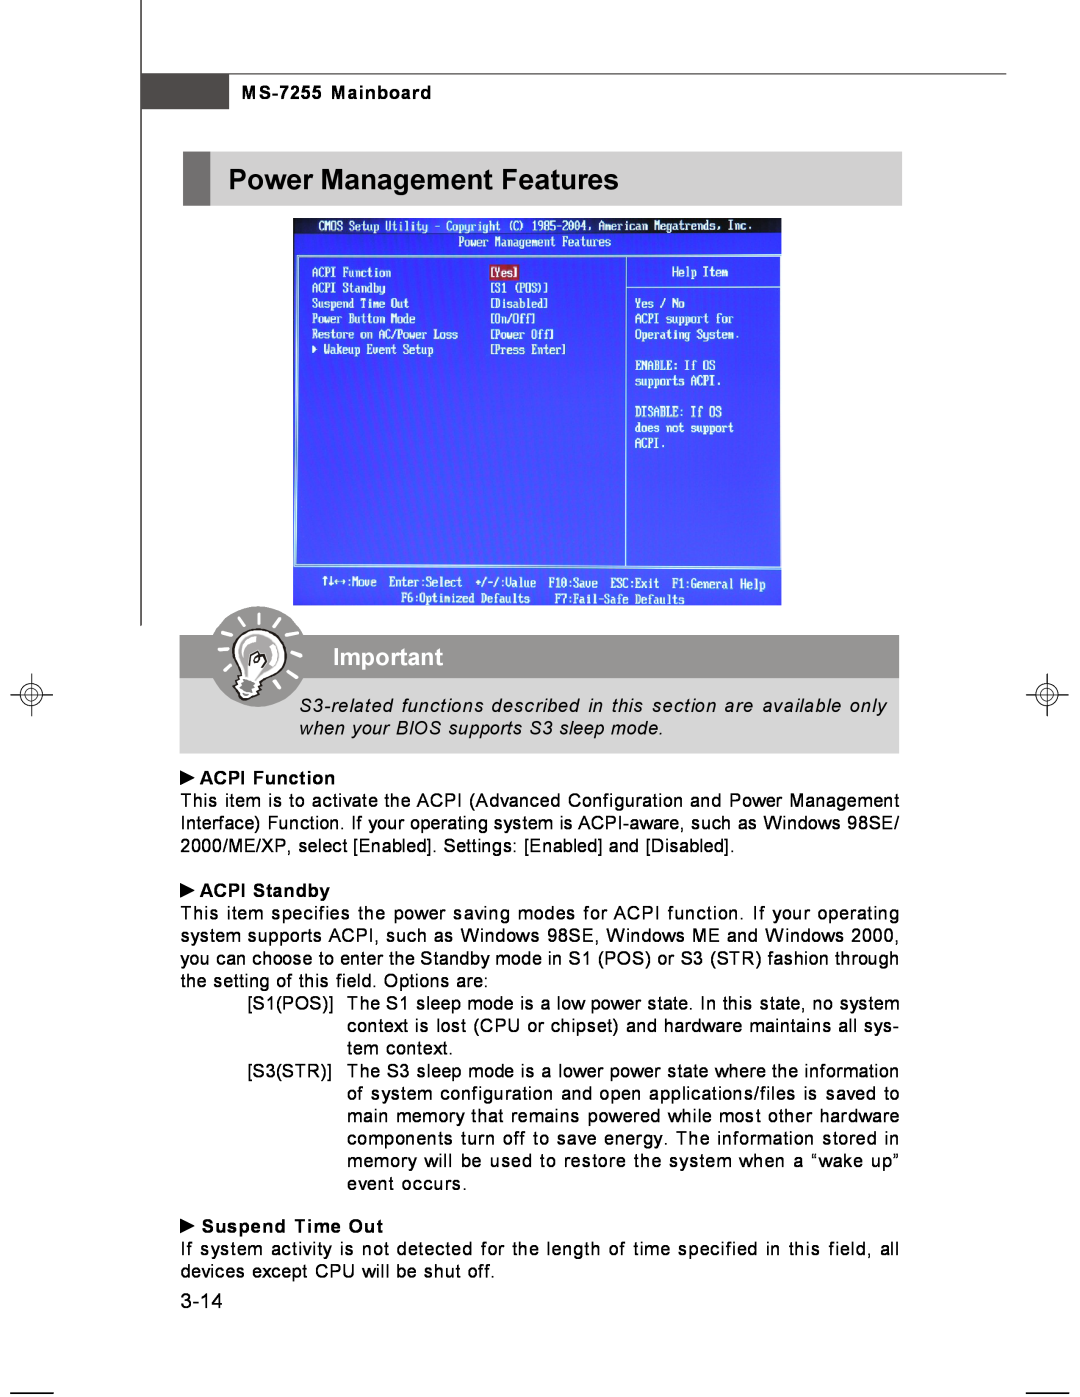 MSI manual Power Management Features, 3-14, ACPI Function, ACPI Standby, Suspend Time Out, MS-7255 Mainboard 